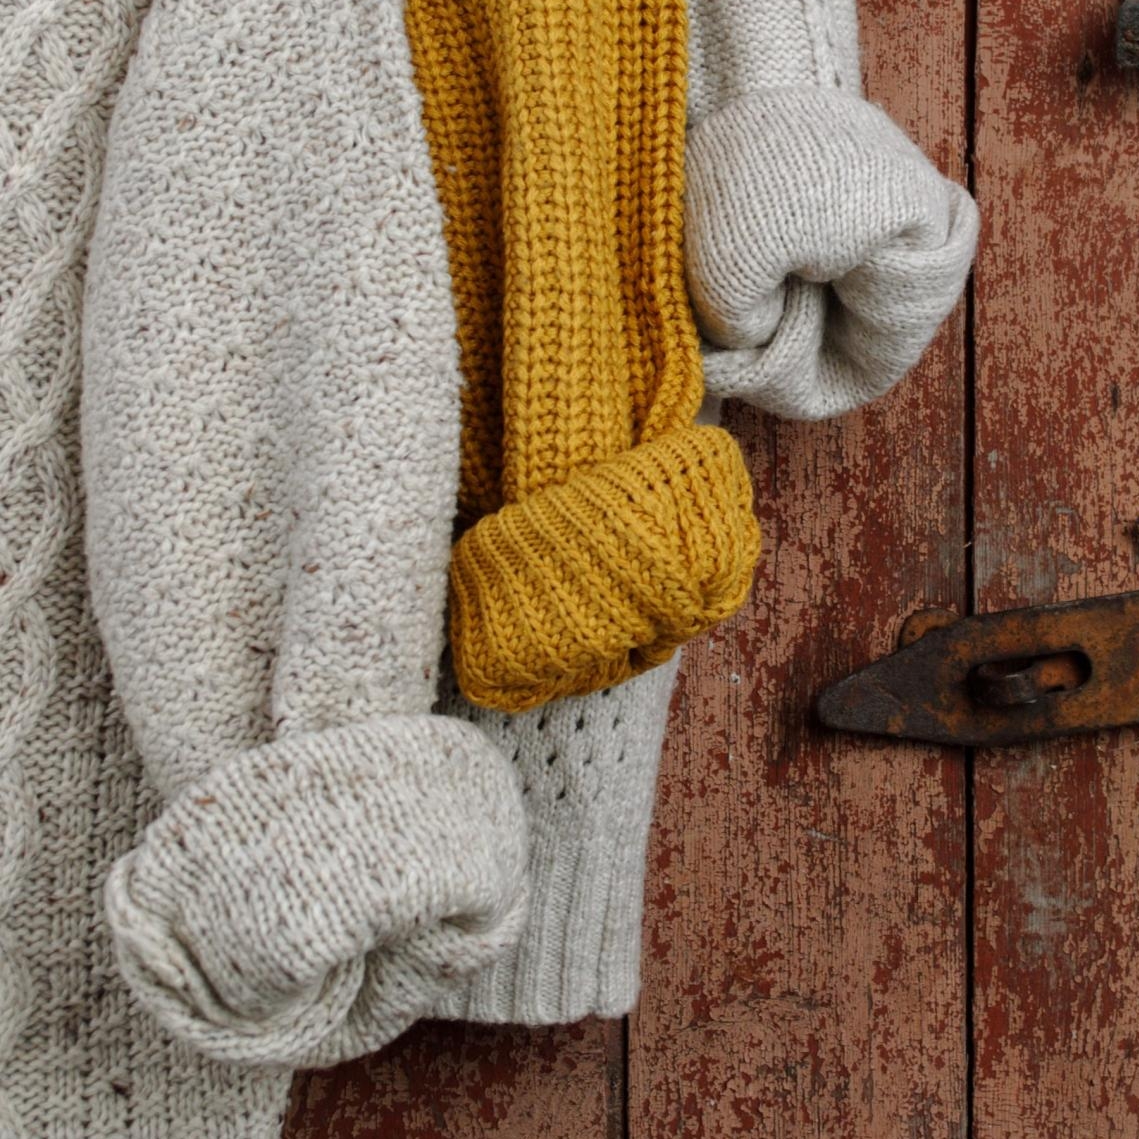 yellow, beige, and grey knitted sweaters